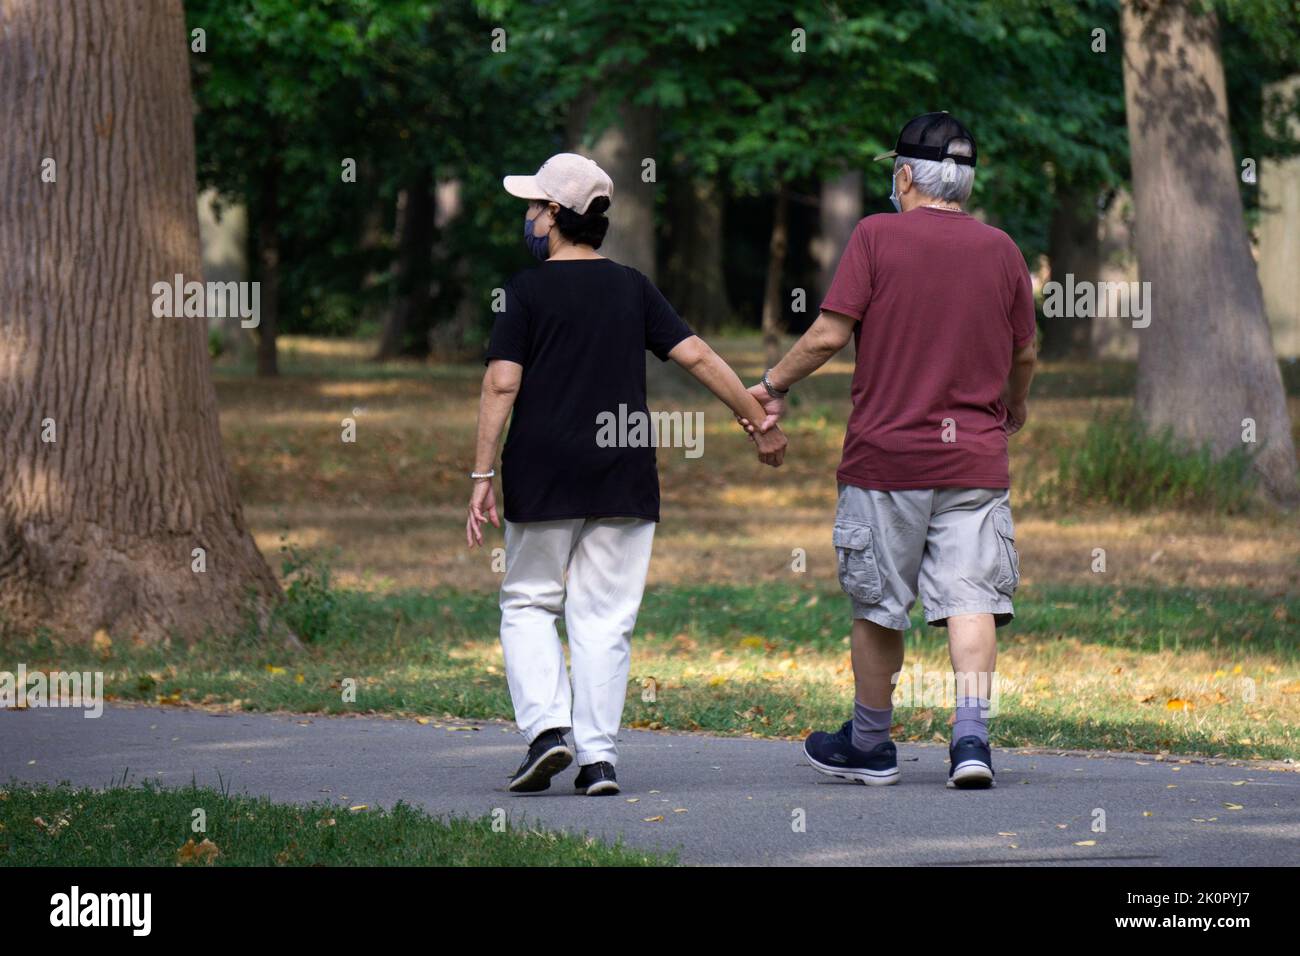 An older couple walking in the park with the man holding onto the woman for extra support & stability. In Flushing, Queens, New York.. Stock Photo